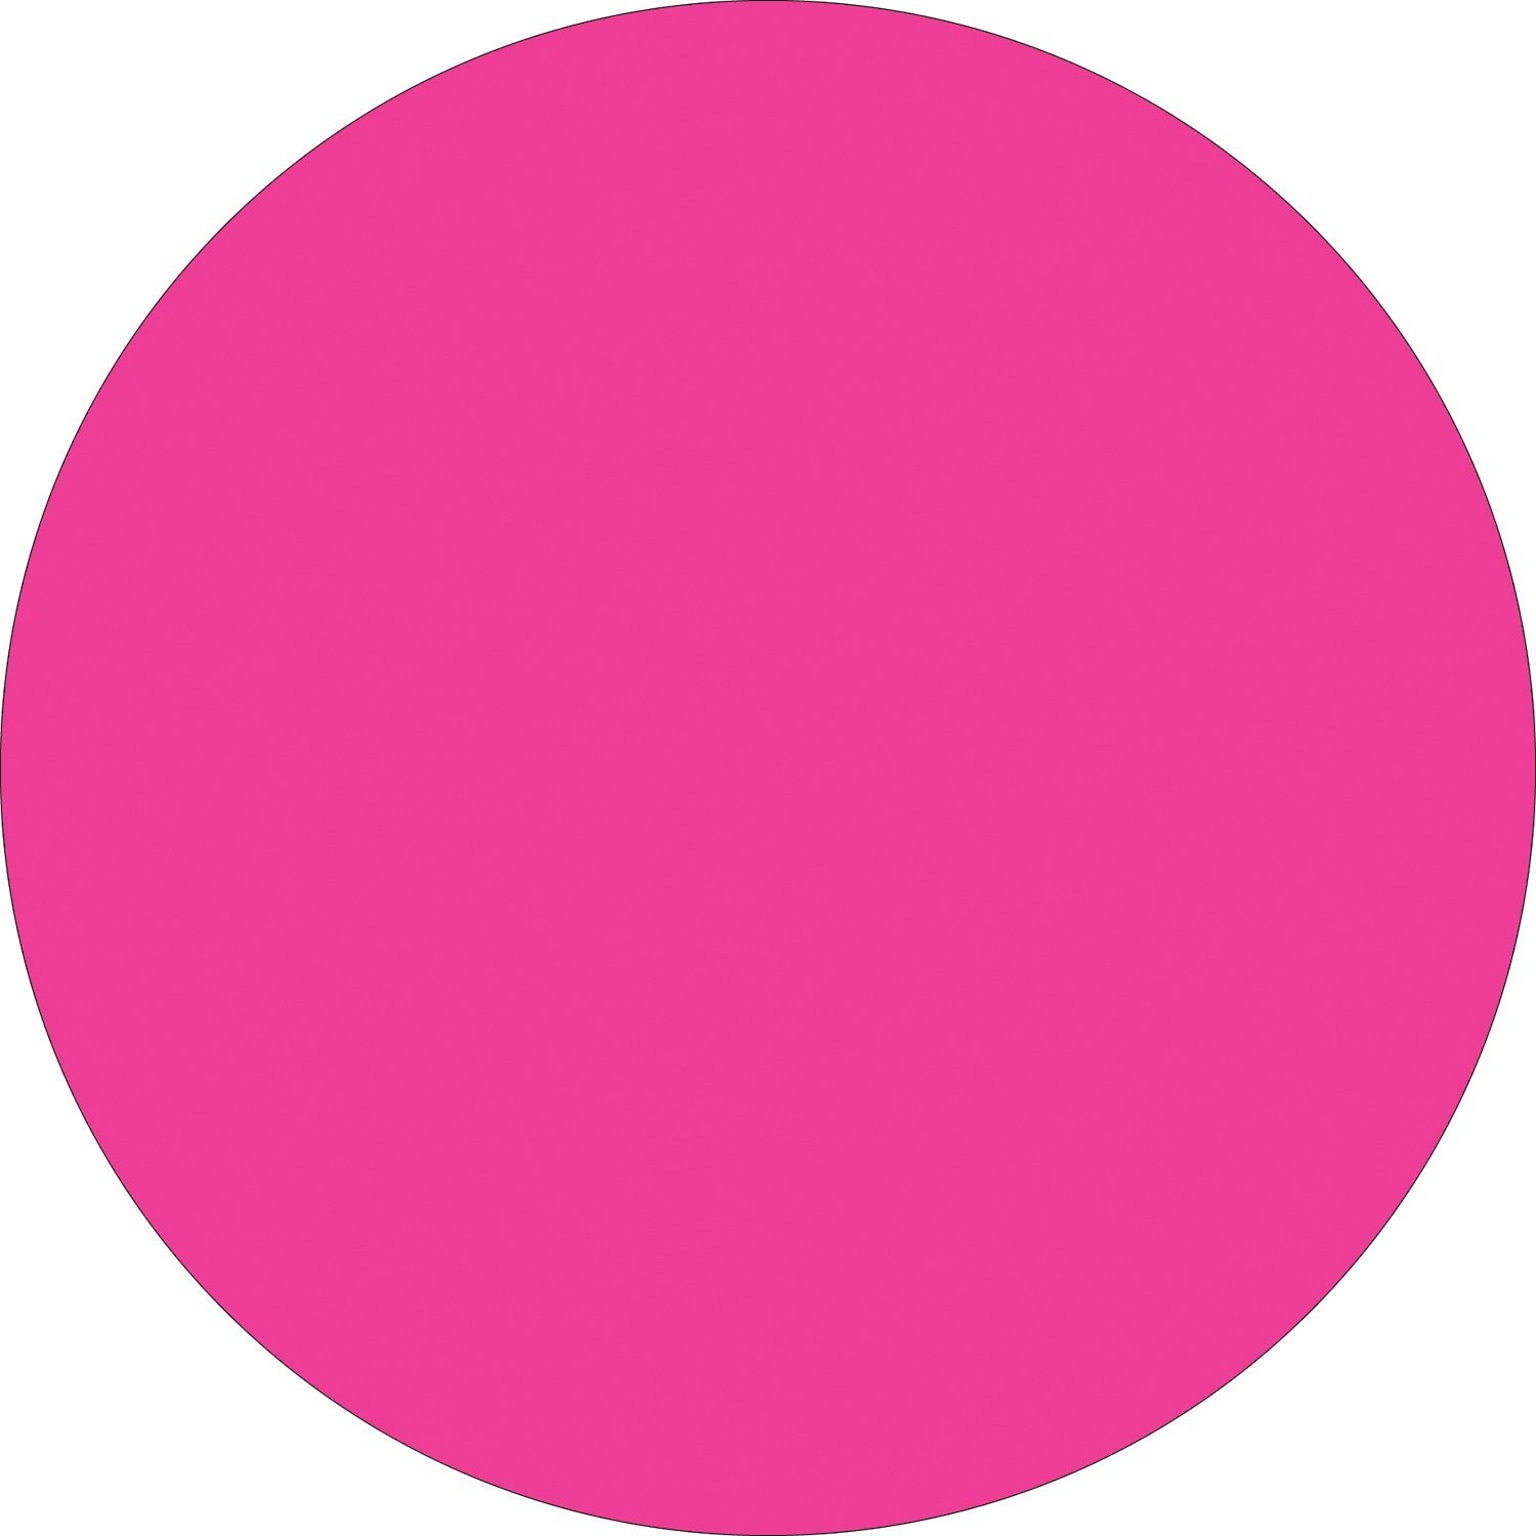 Tape Logic 1 1/2 Circle Inventory Label, Fluorescent Pink, 500/Roll